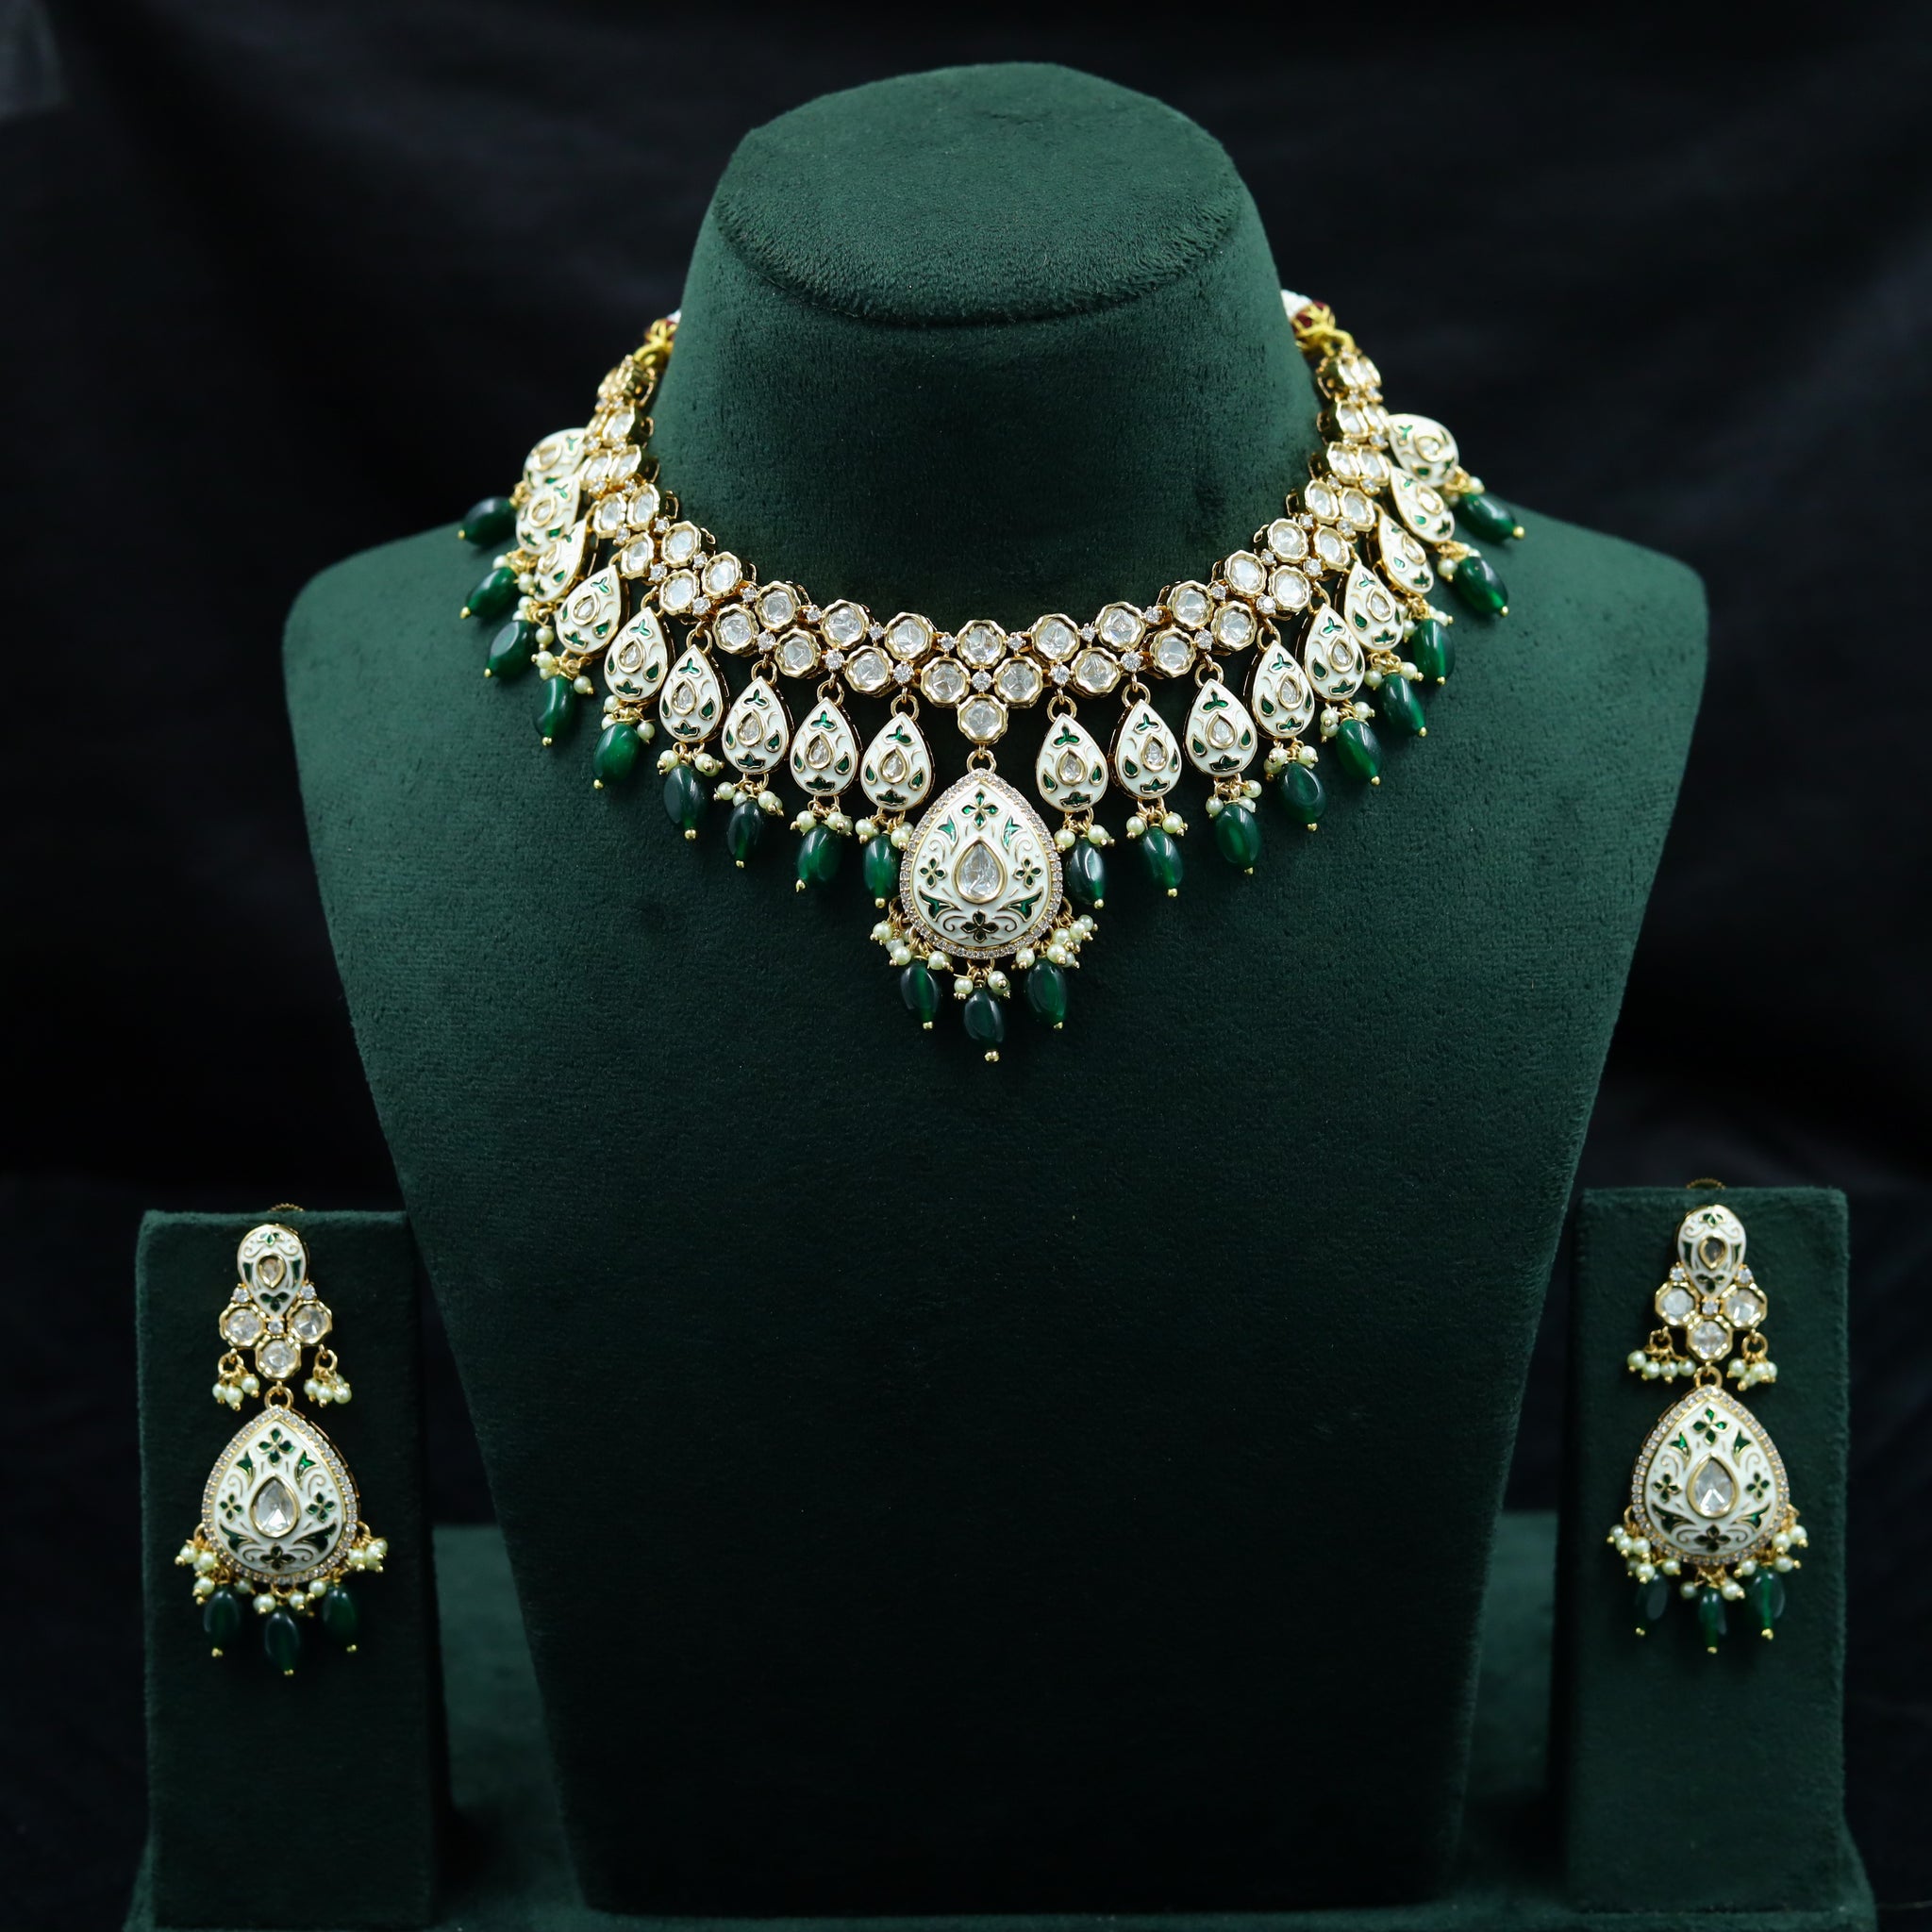 https://www.dazzlesjewellery.in/collections/tops-studs/products/tops-studs-zircon-ad-earring-10720-69